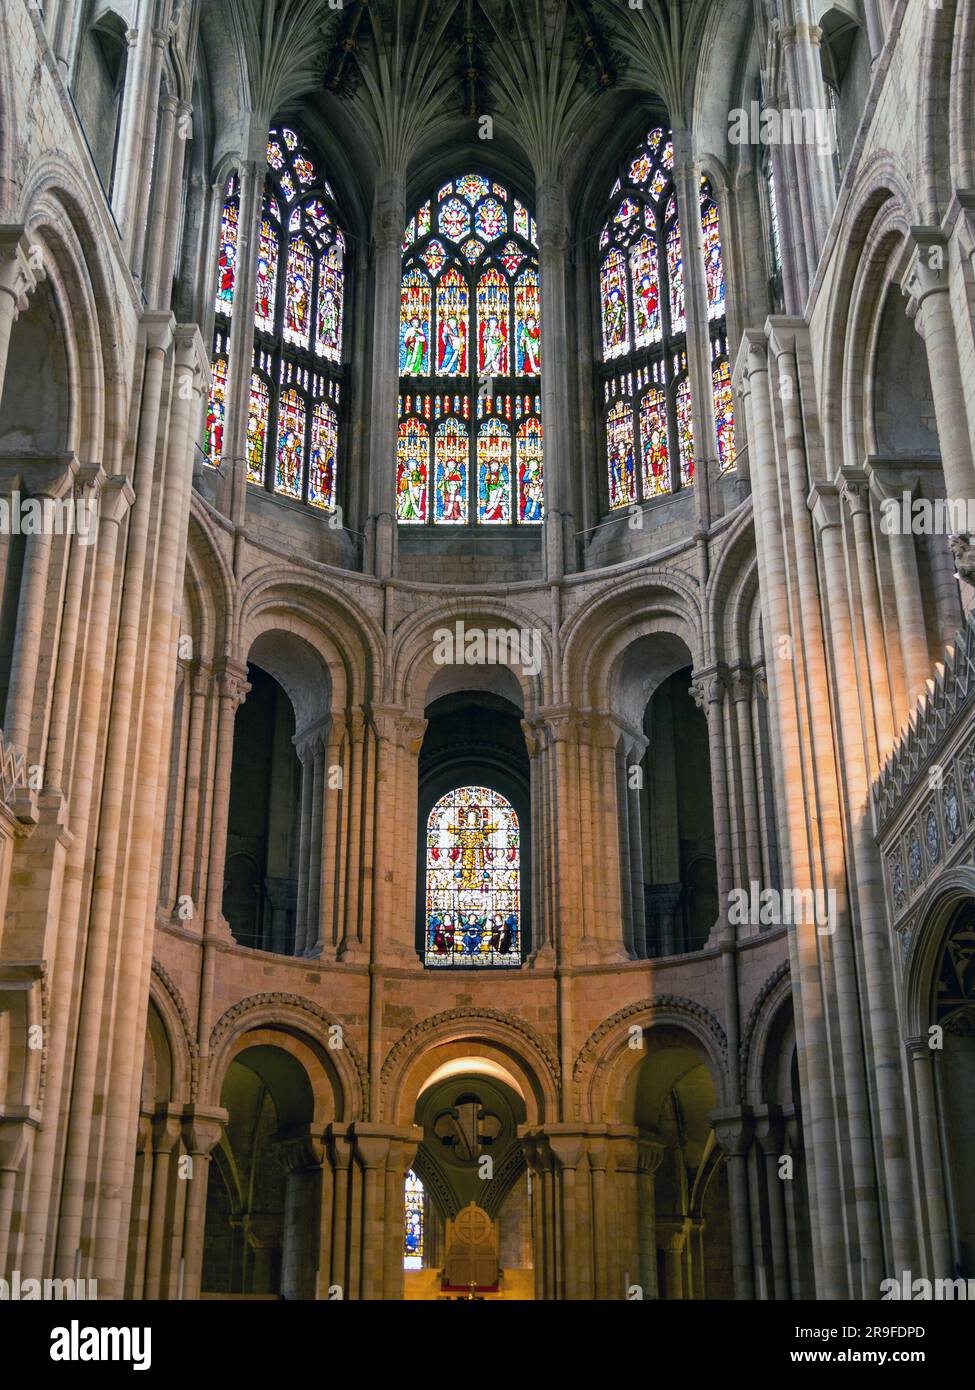 Arches, columns, pillars and stained glass windows of the Presbytery, Norwich Cathedral, Norwich, England, UK Stock Photo